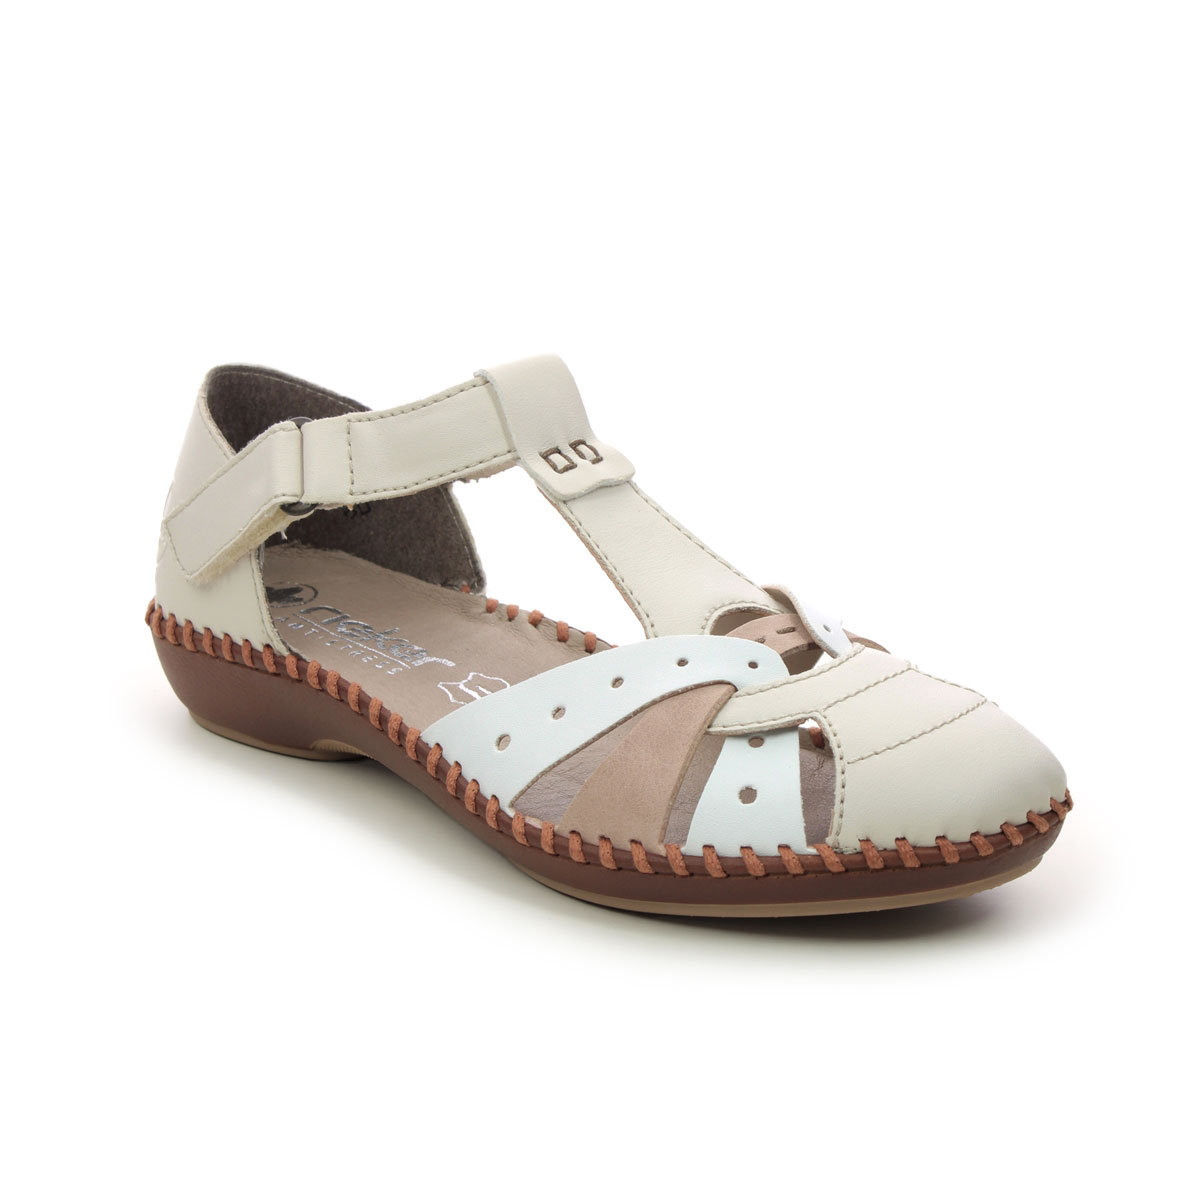 Rieker M1655-61 Off White Beige Womens Closed Toe Sandals in a Plain Leather in Size 40